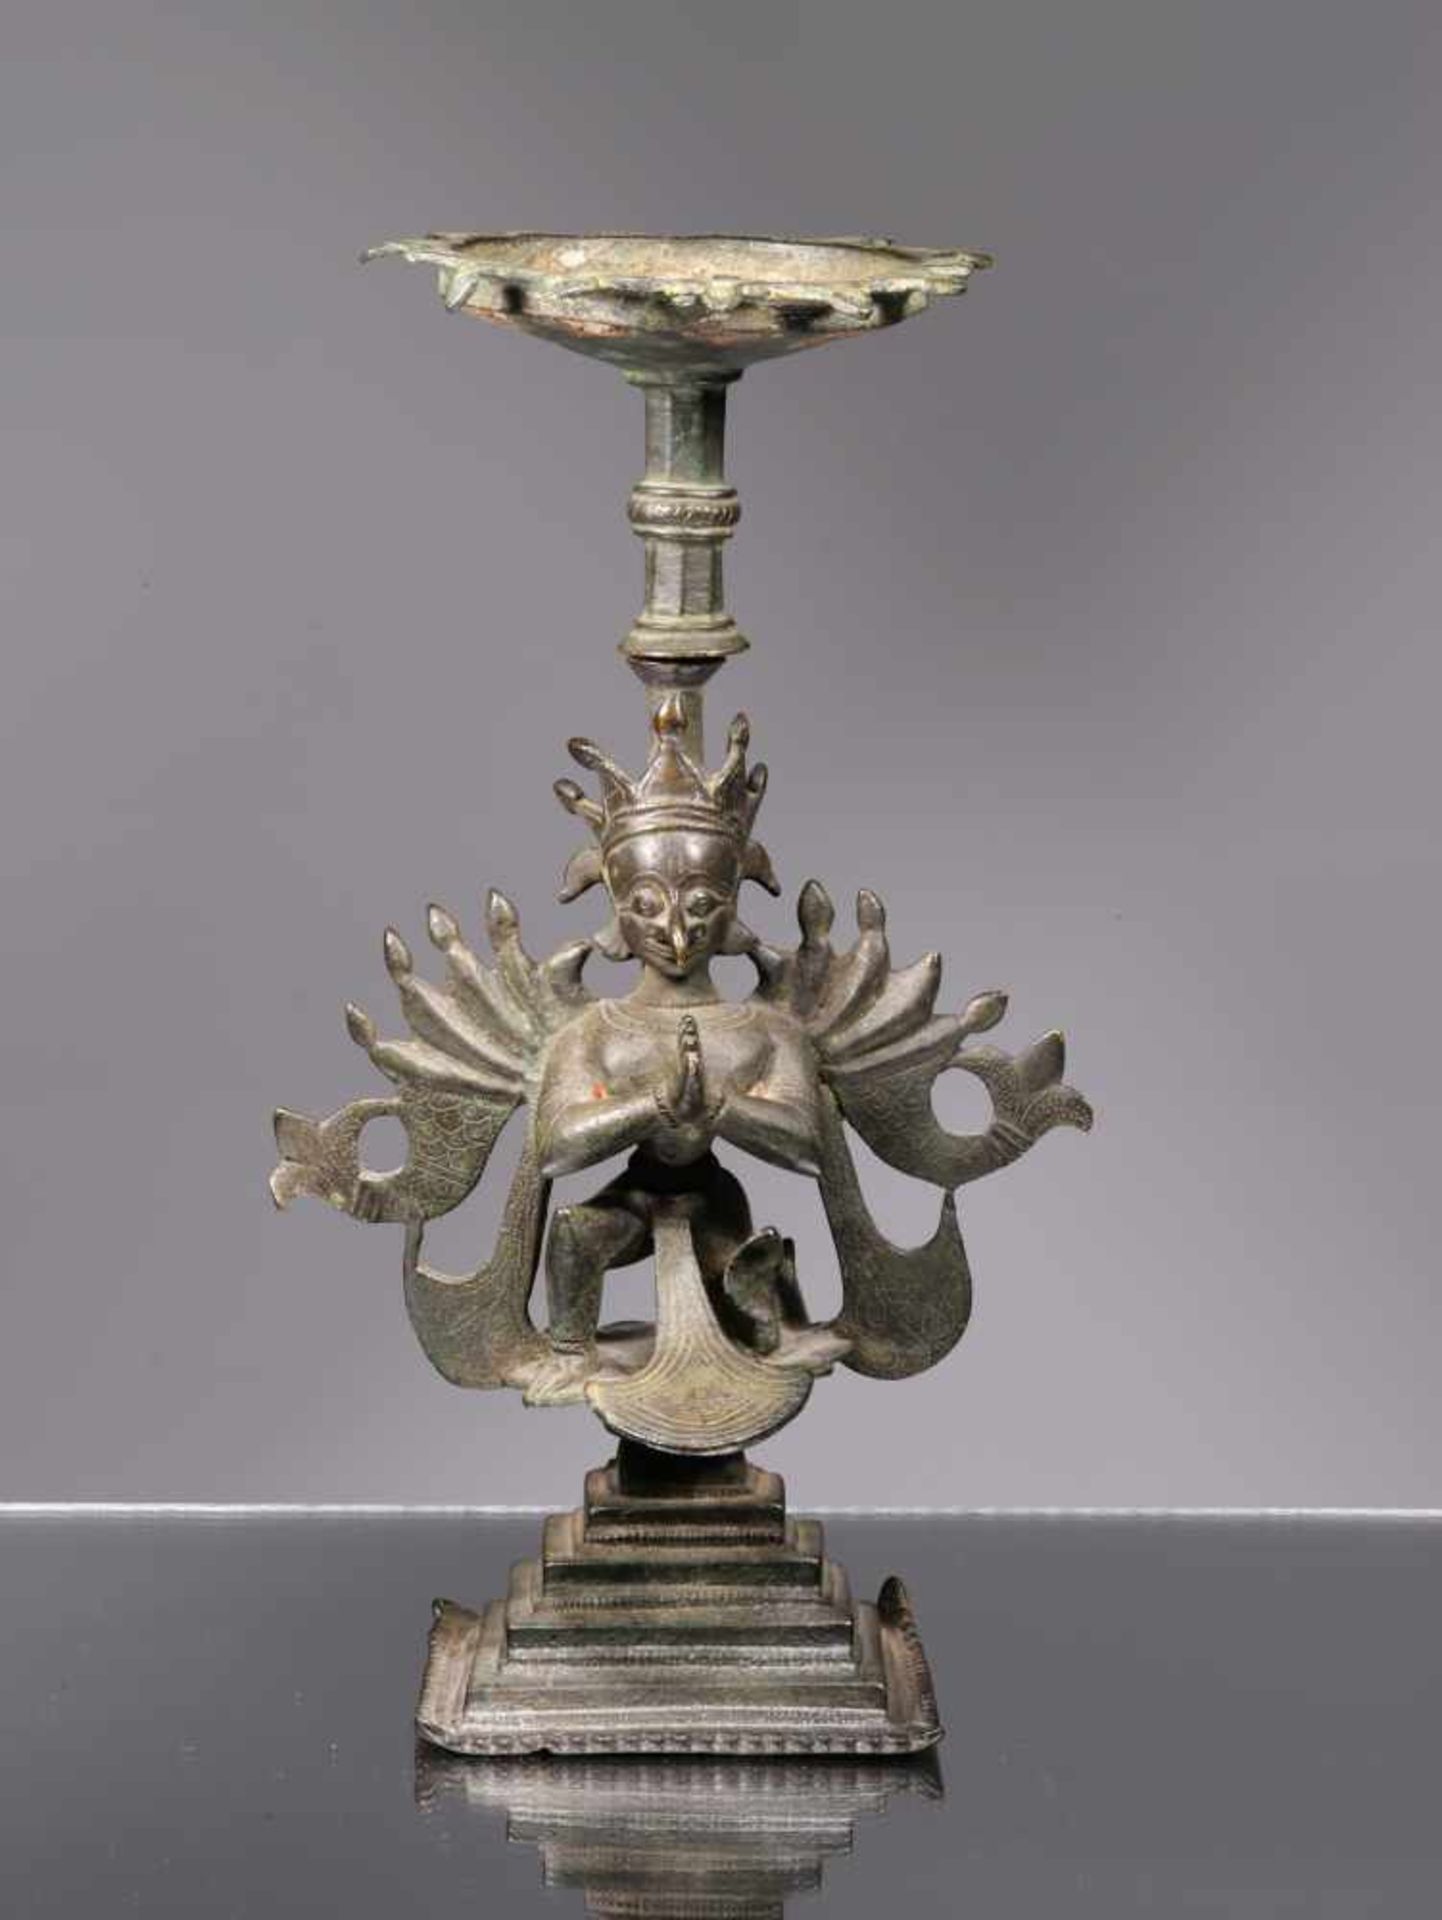 INCENSE BURNER IN FORM OF A GARUDA CAST IN TWO PARTSBronzeIndia , 16th centuryDimensions: Height